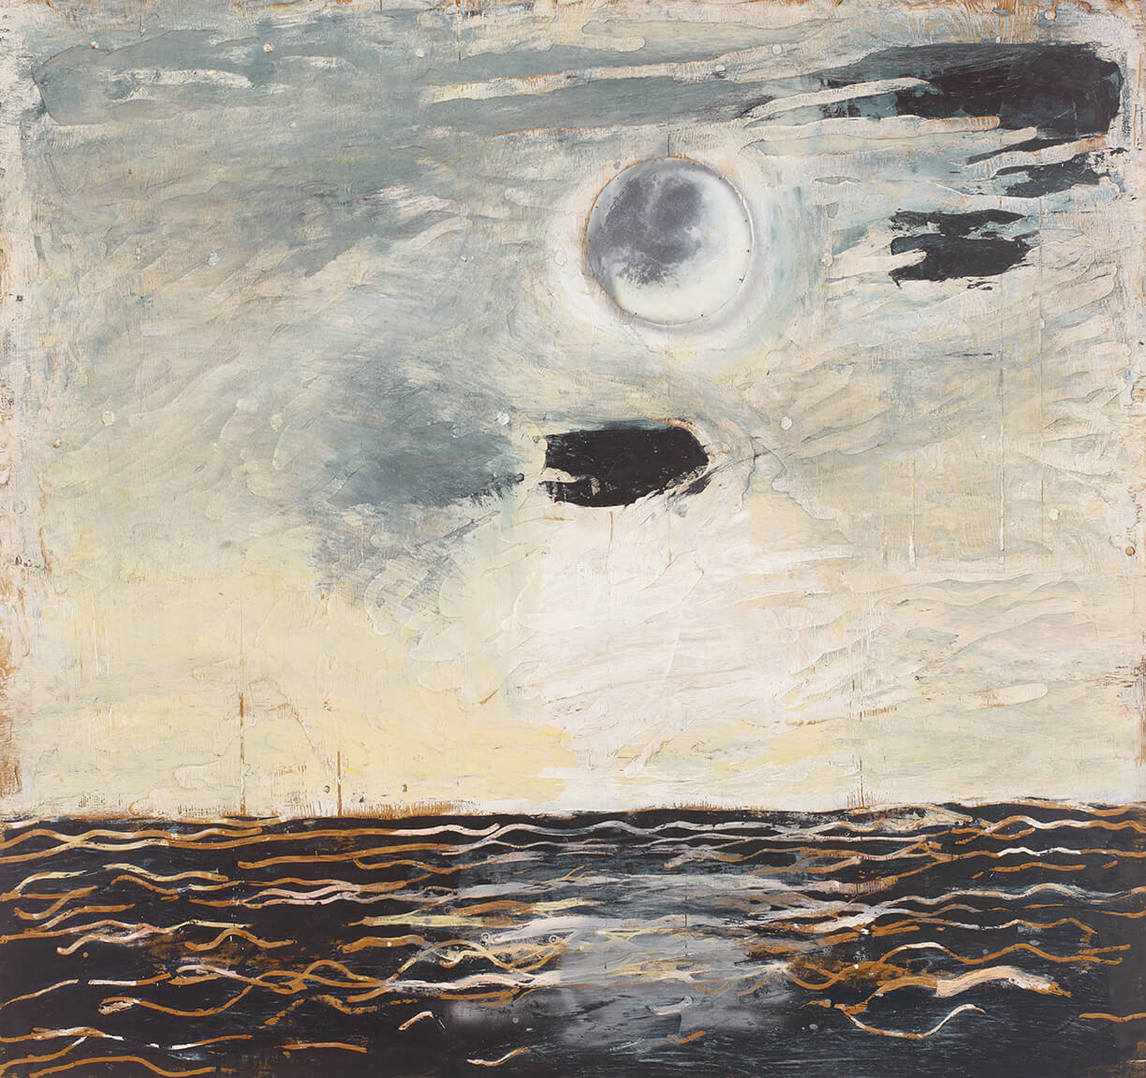 Moon over Water, 1977, by Paterson Ewen